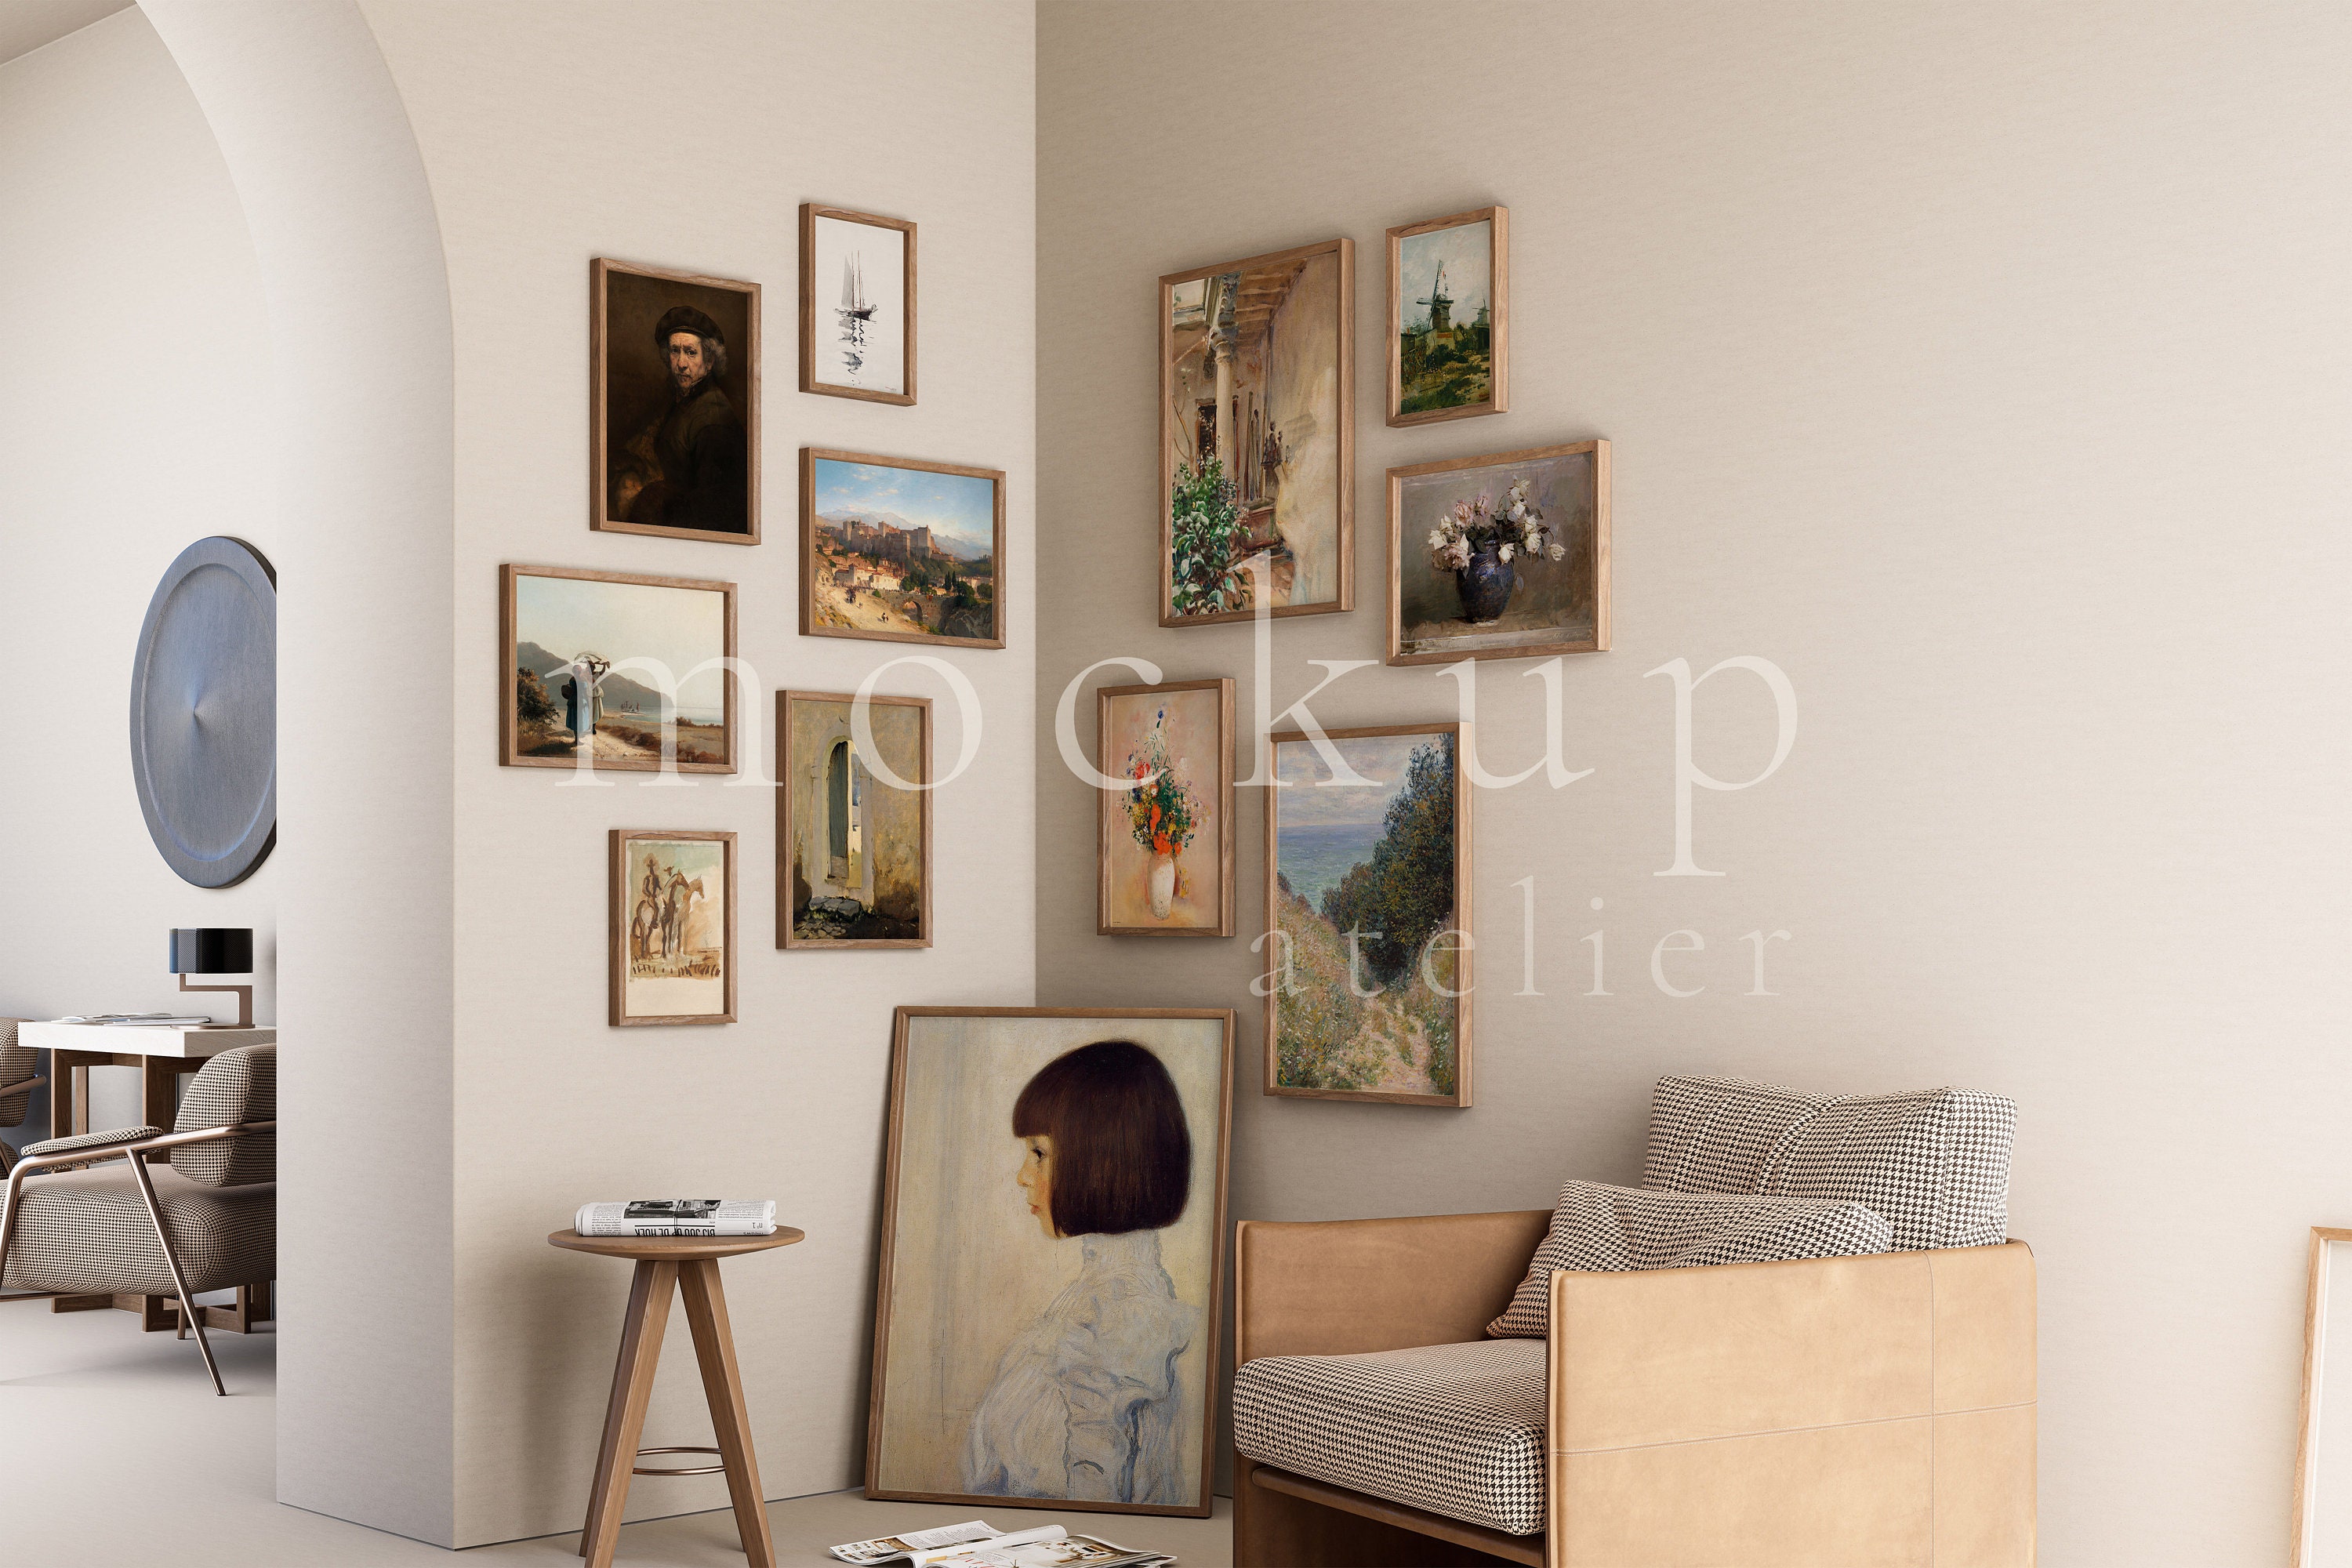 4-Piece Light Oak Wood Gallery Wall Picture Frame Set + Reviews